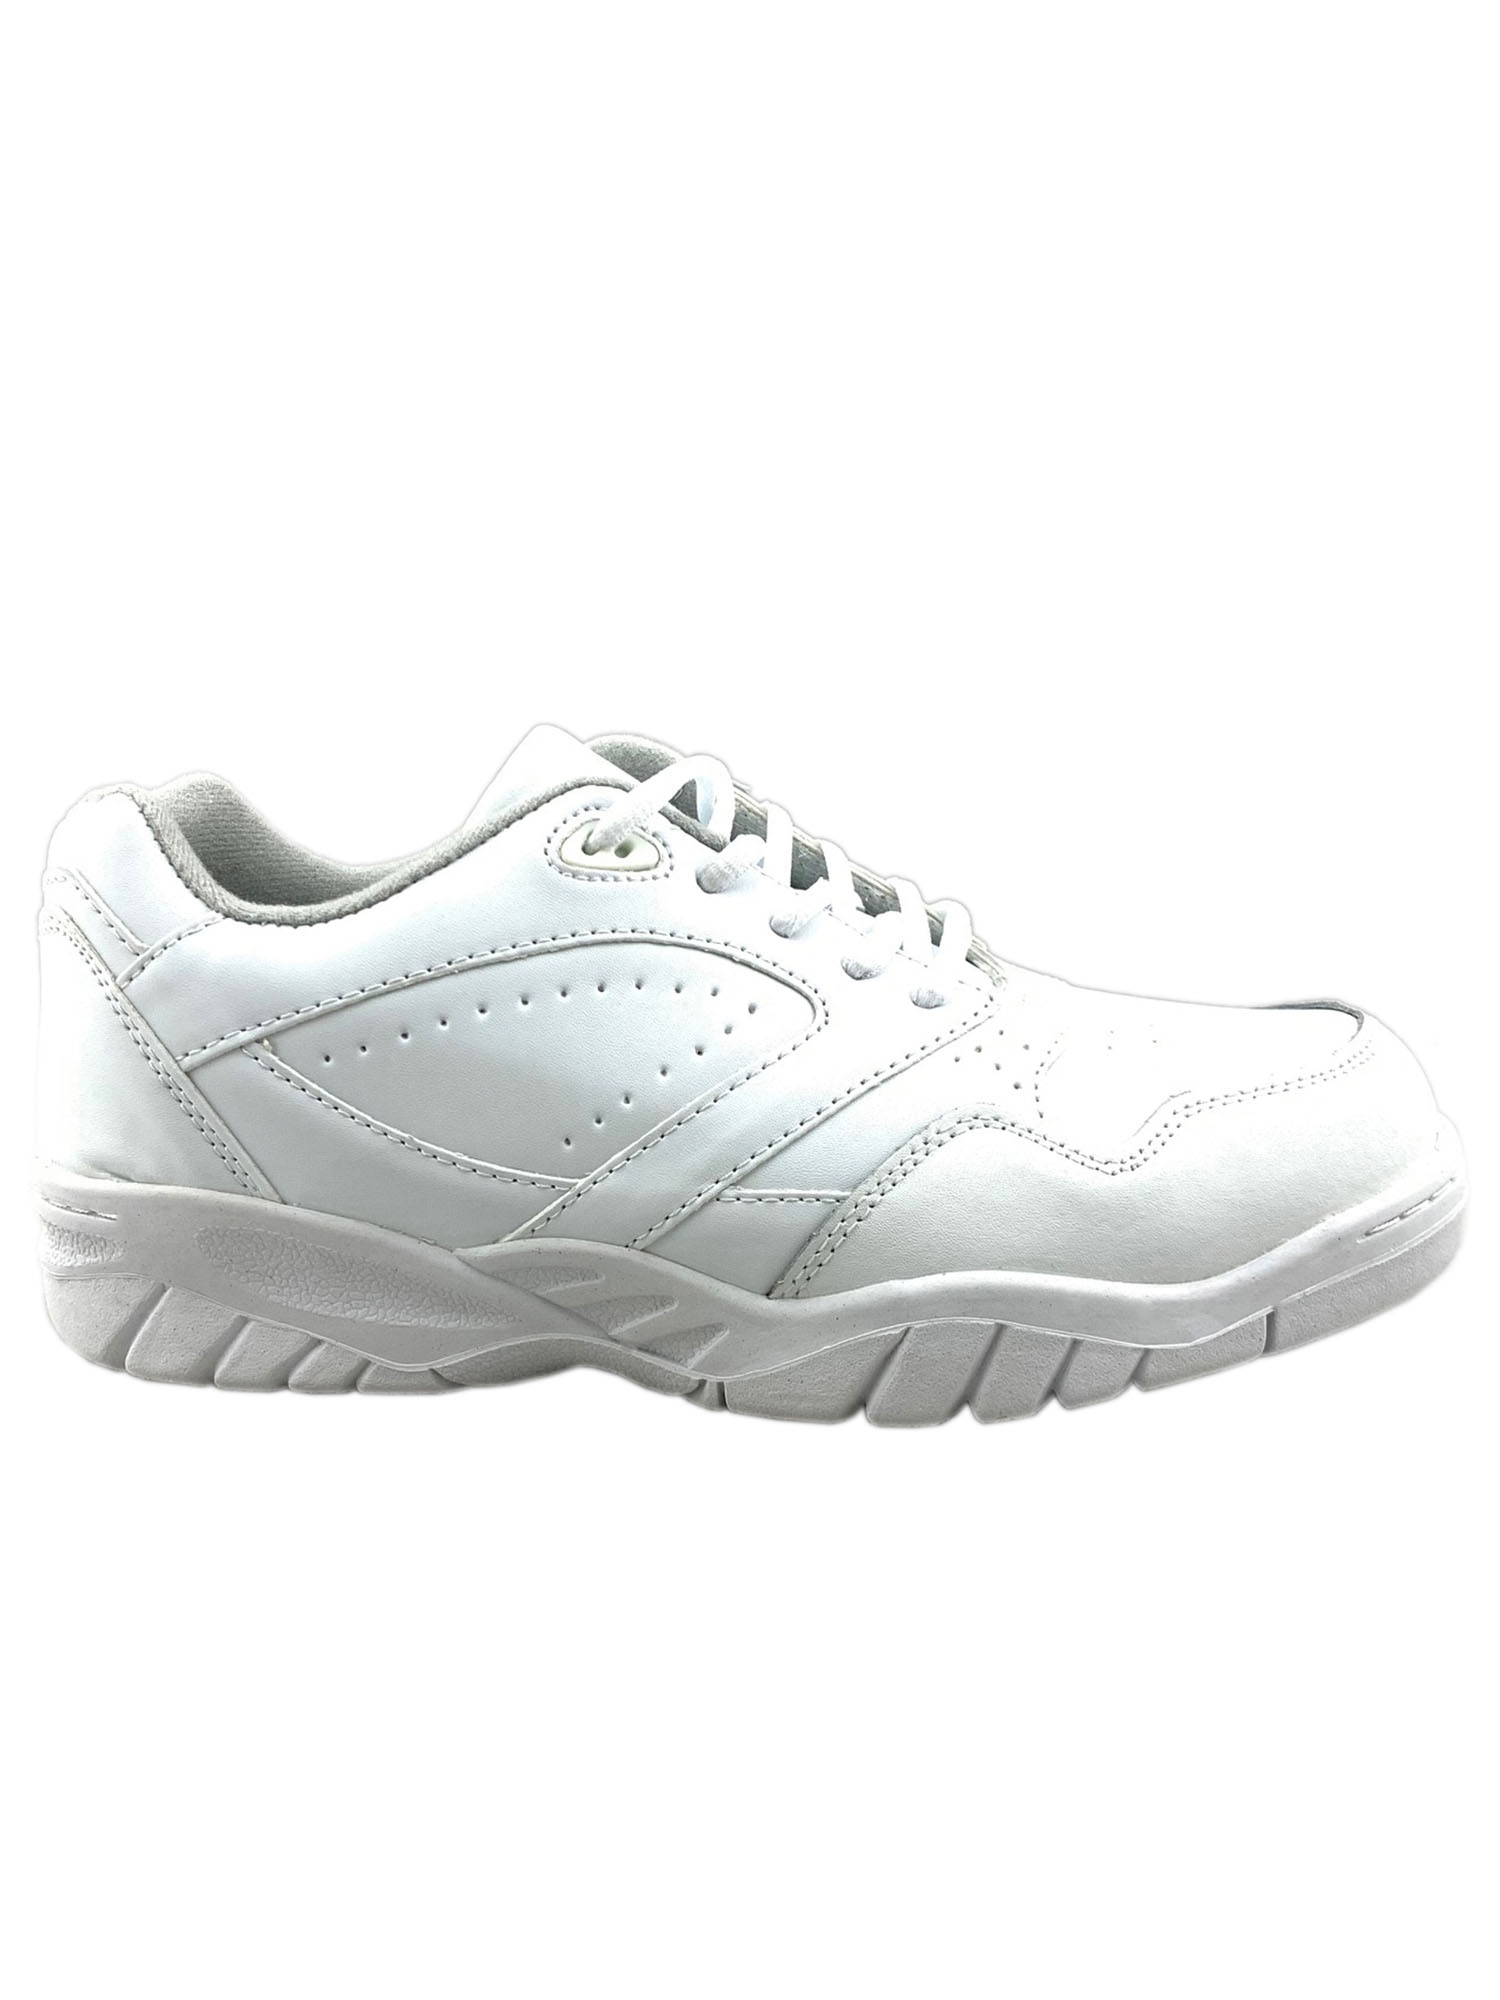 Tanleewa Men's Leather White Sports Shoes Lightweight Sneakers Breathable Casual Shoe Size 7.5 - image 1 of 5